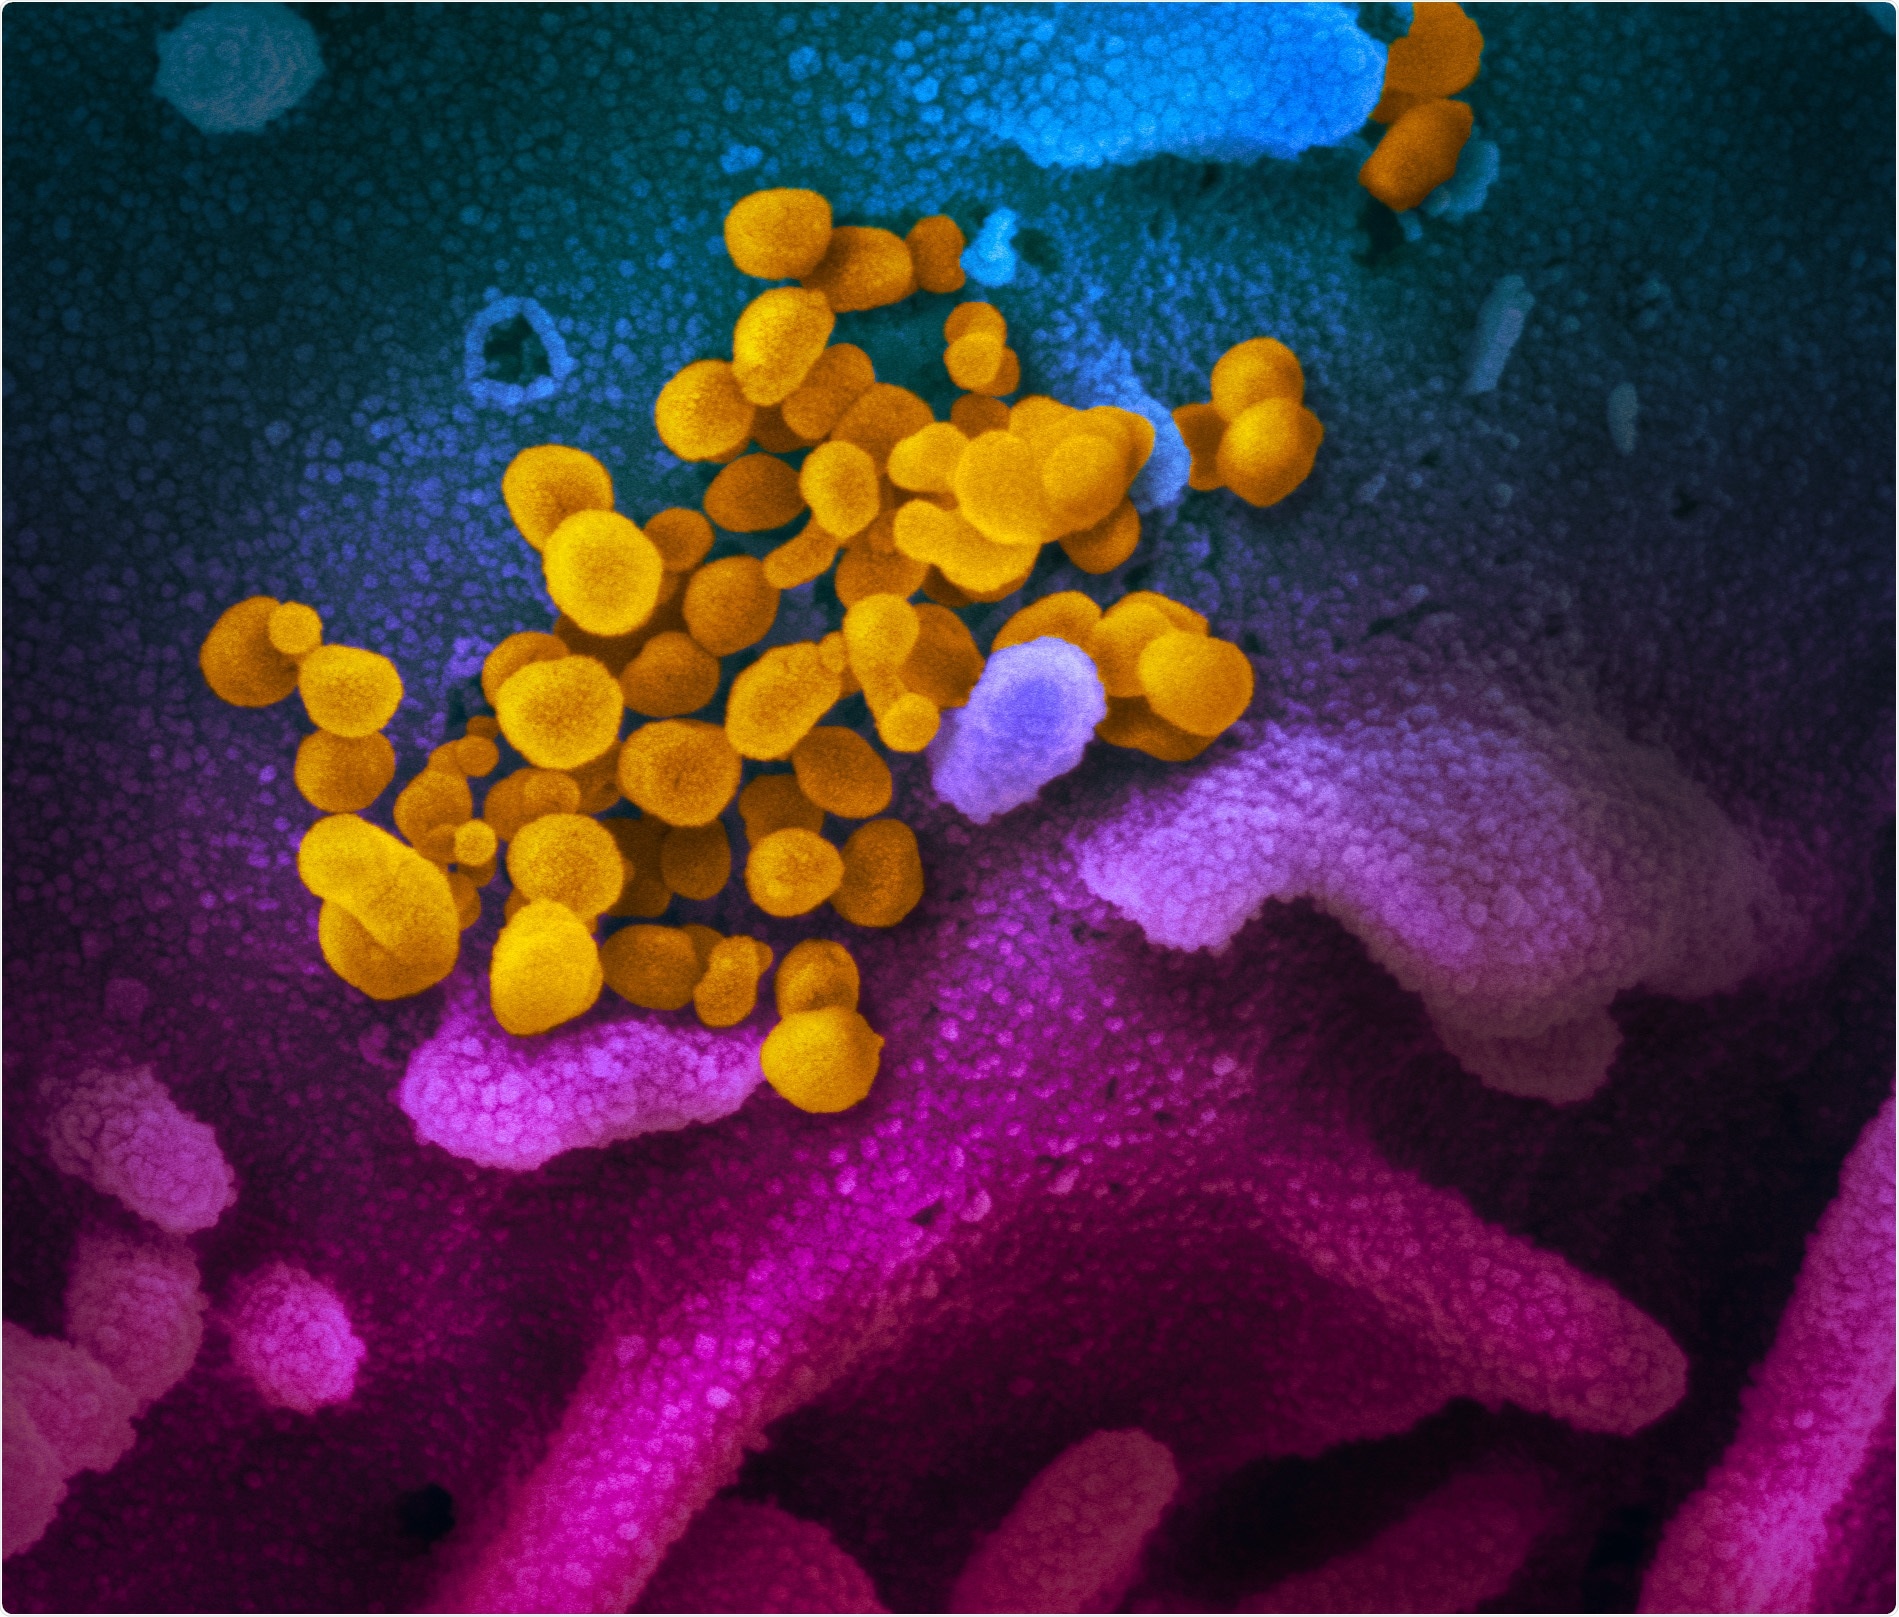 Novel Coronavirus SARS-CoV-2 This scanning electron microscope image shows SARS-CoV-2 (yellow)—also known as 2019-nCoV, the virus that causes COVID-19—isolated from a patient in the U.S., emerging from the surface of cells (blue/pink) cultured in the lab. Image captured and colorized at NIAID